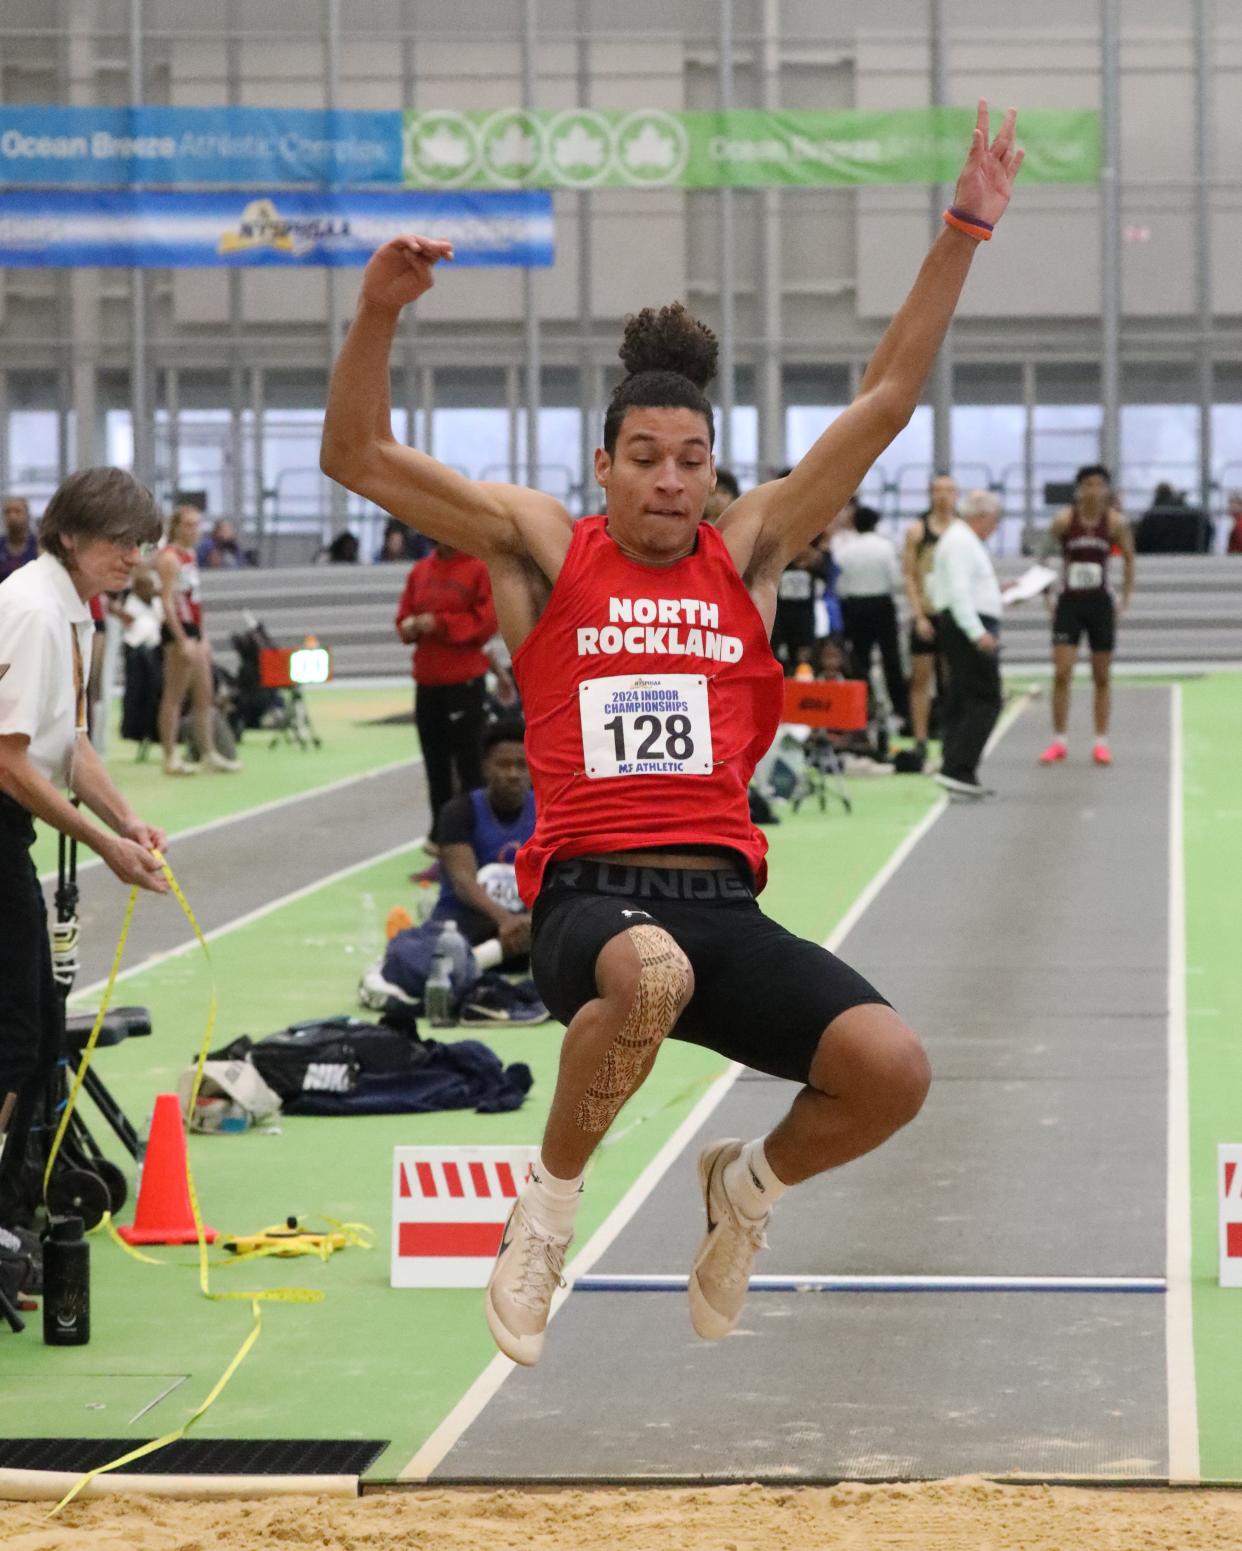 Yunior Sanchez from North Rockland competes in the boys long jump at the 2024 New York State Indoor Track and Field Championships at the Ocean Breeze Athletic Complex in Staten Island, March 2, 2024.